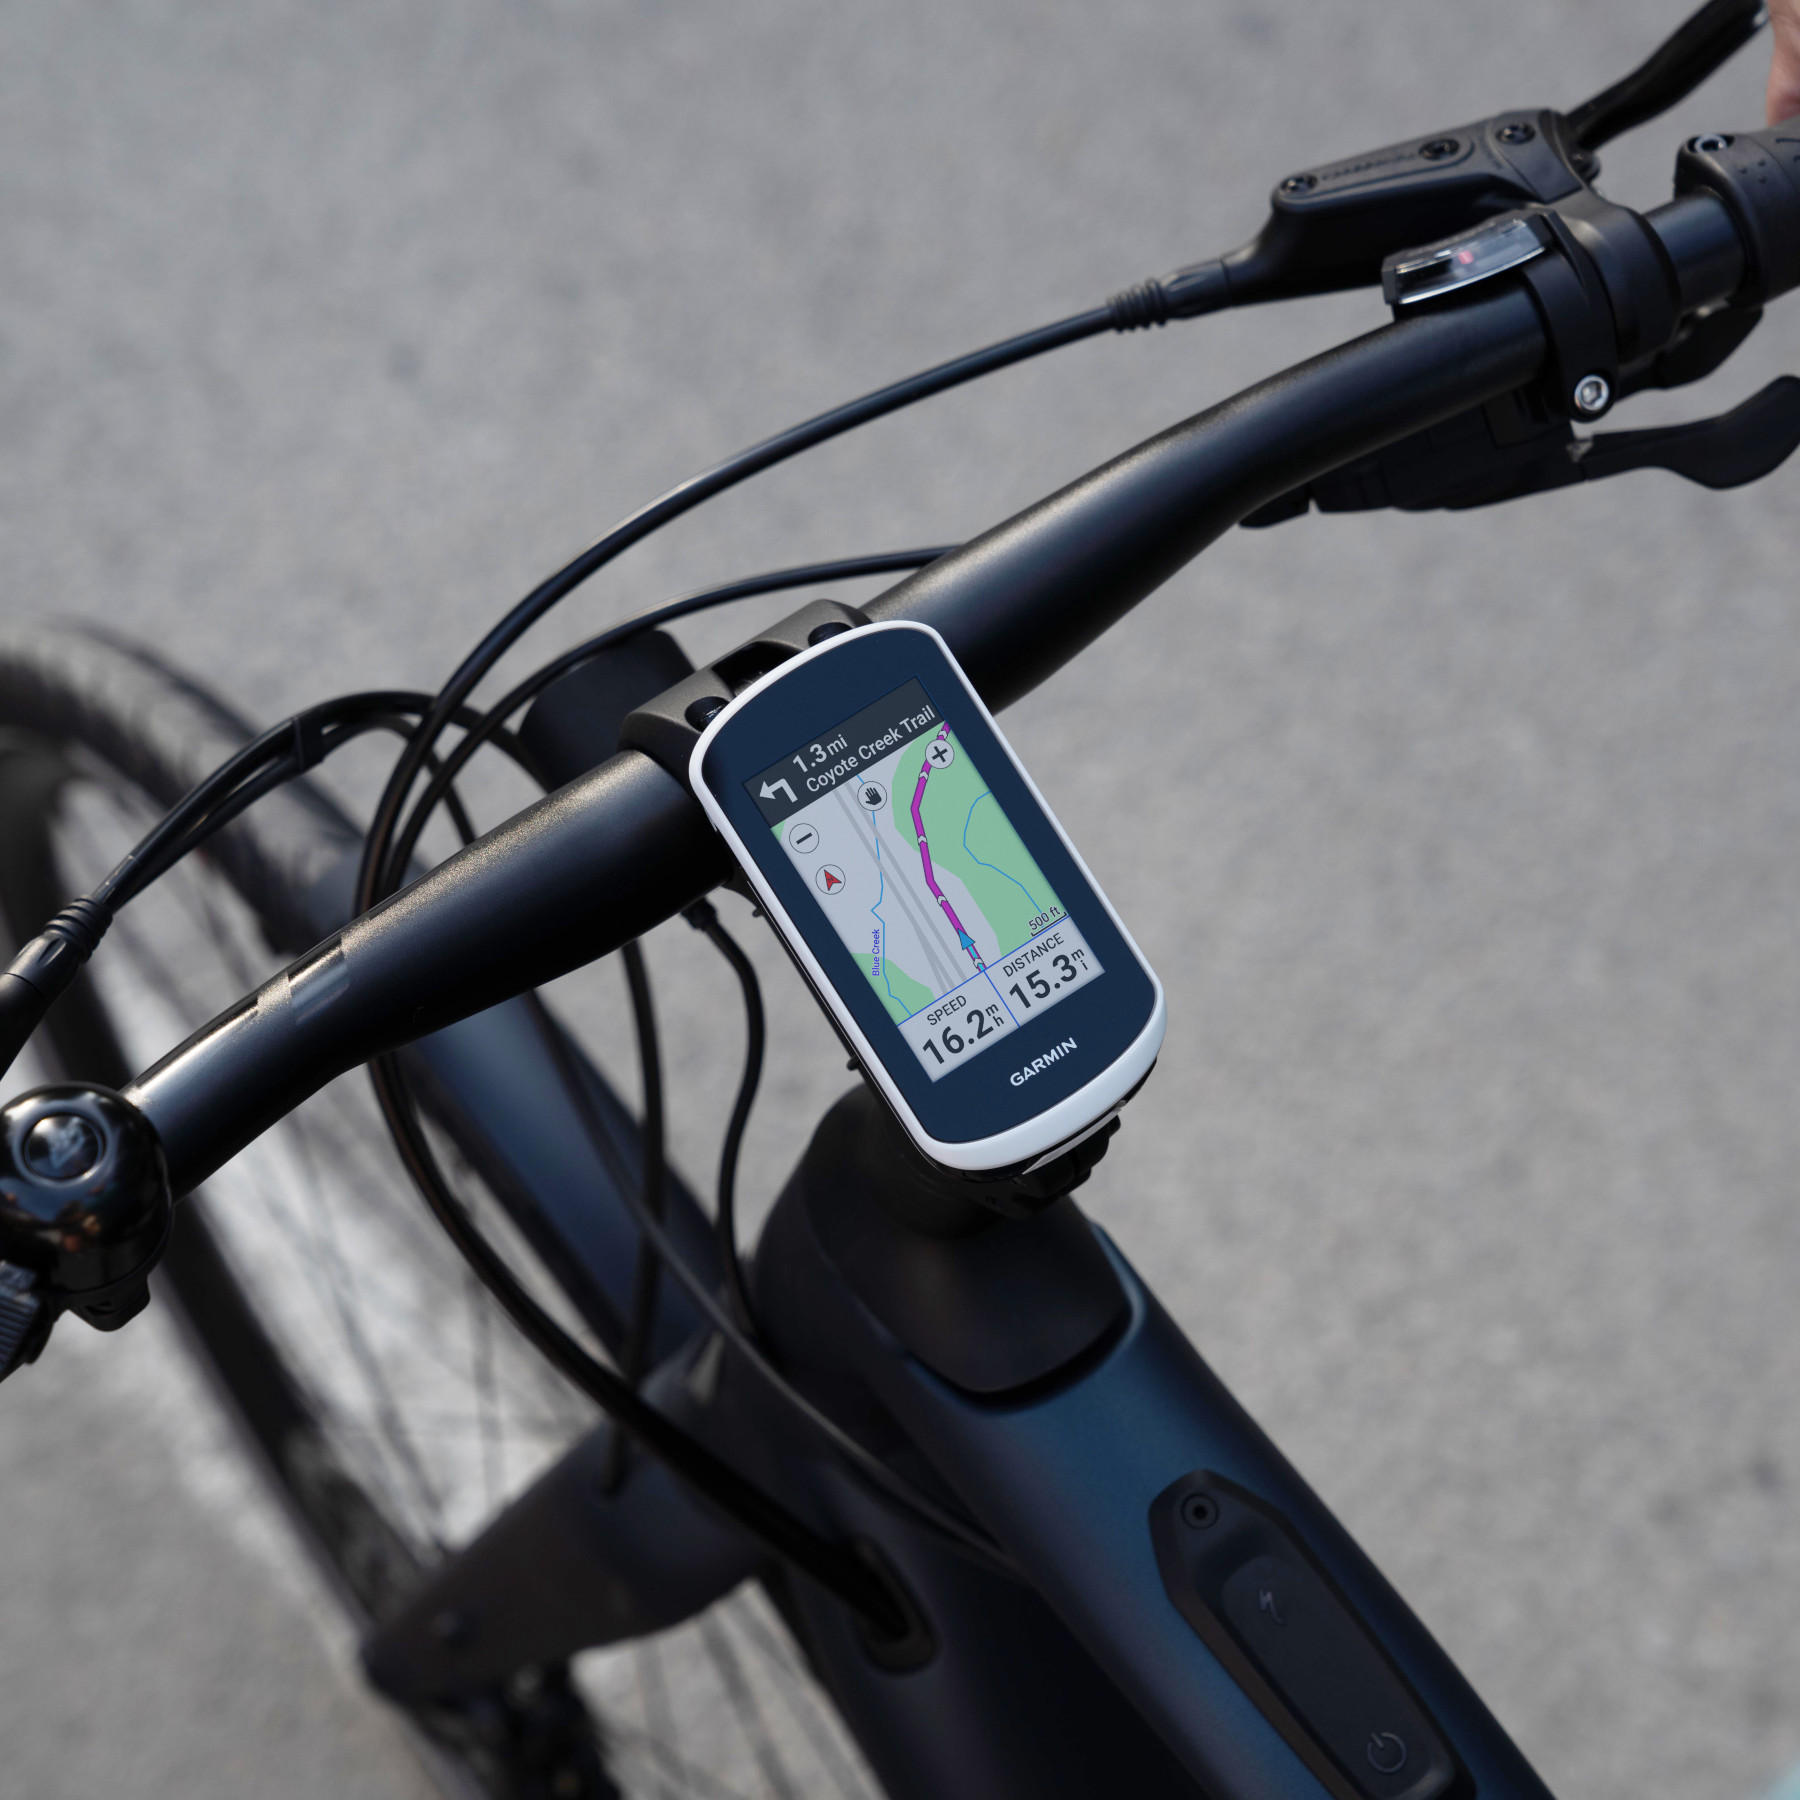 Garmin releases Edge Explore 2 GPS with battery life up to 24 hours